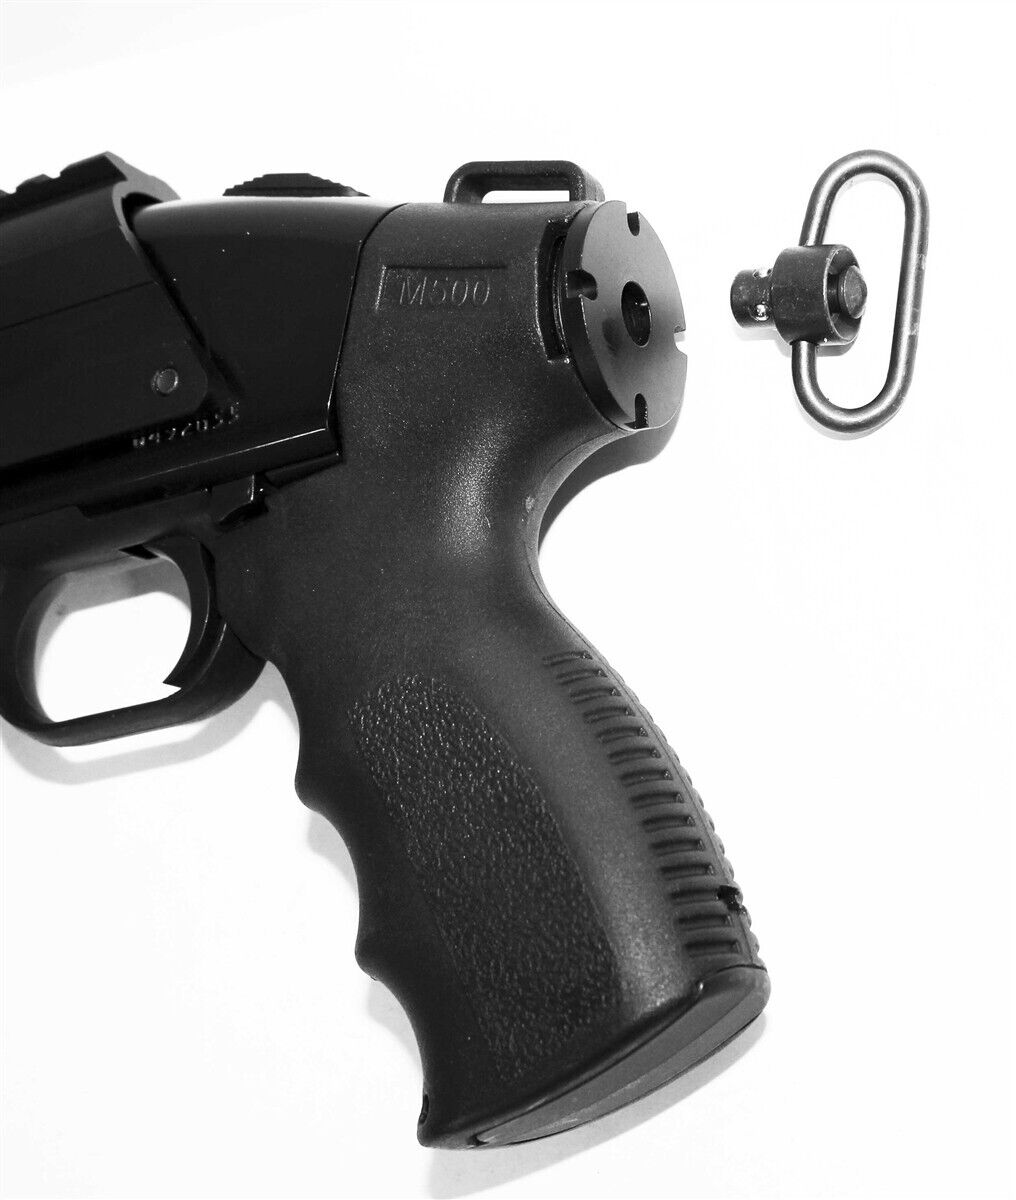 tactical pistol grip with rear cap for Mossberg 590 shockwave.